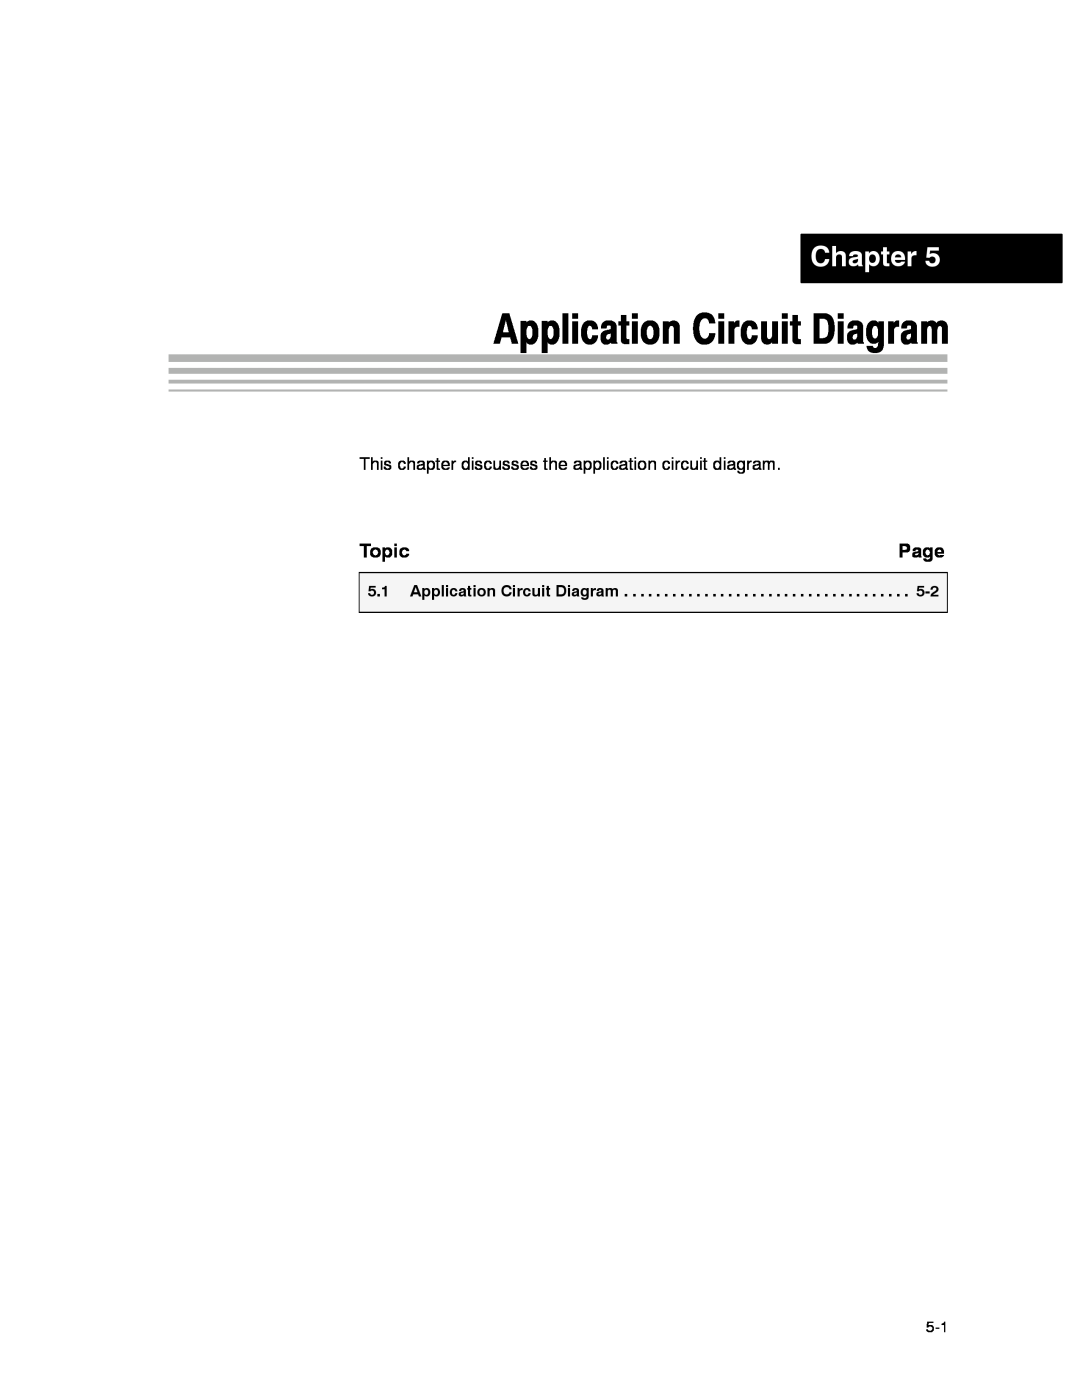 Texas Instruments CDCM7005 manual Application Circuit Diagram, Chapter, Topic, Page 